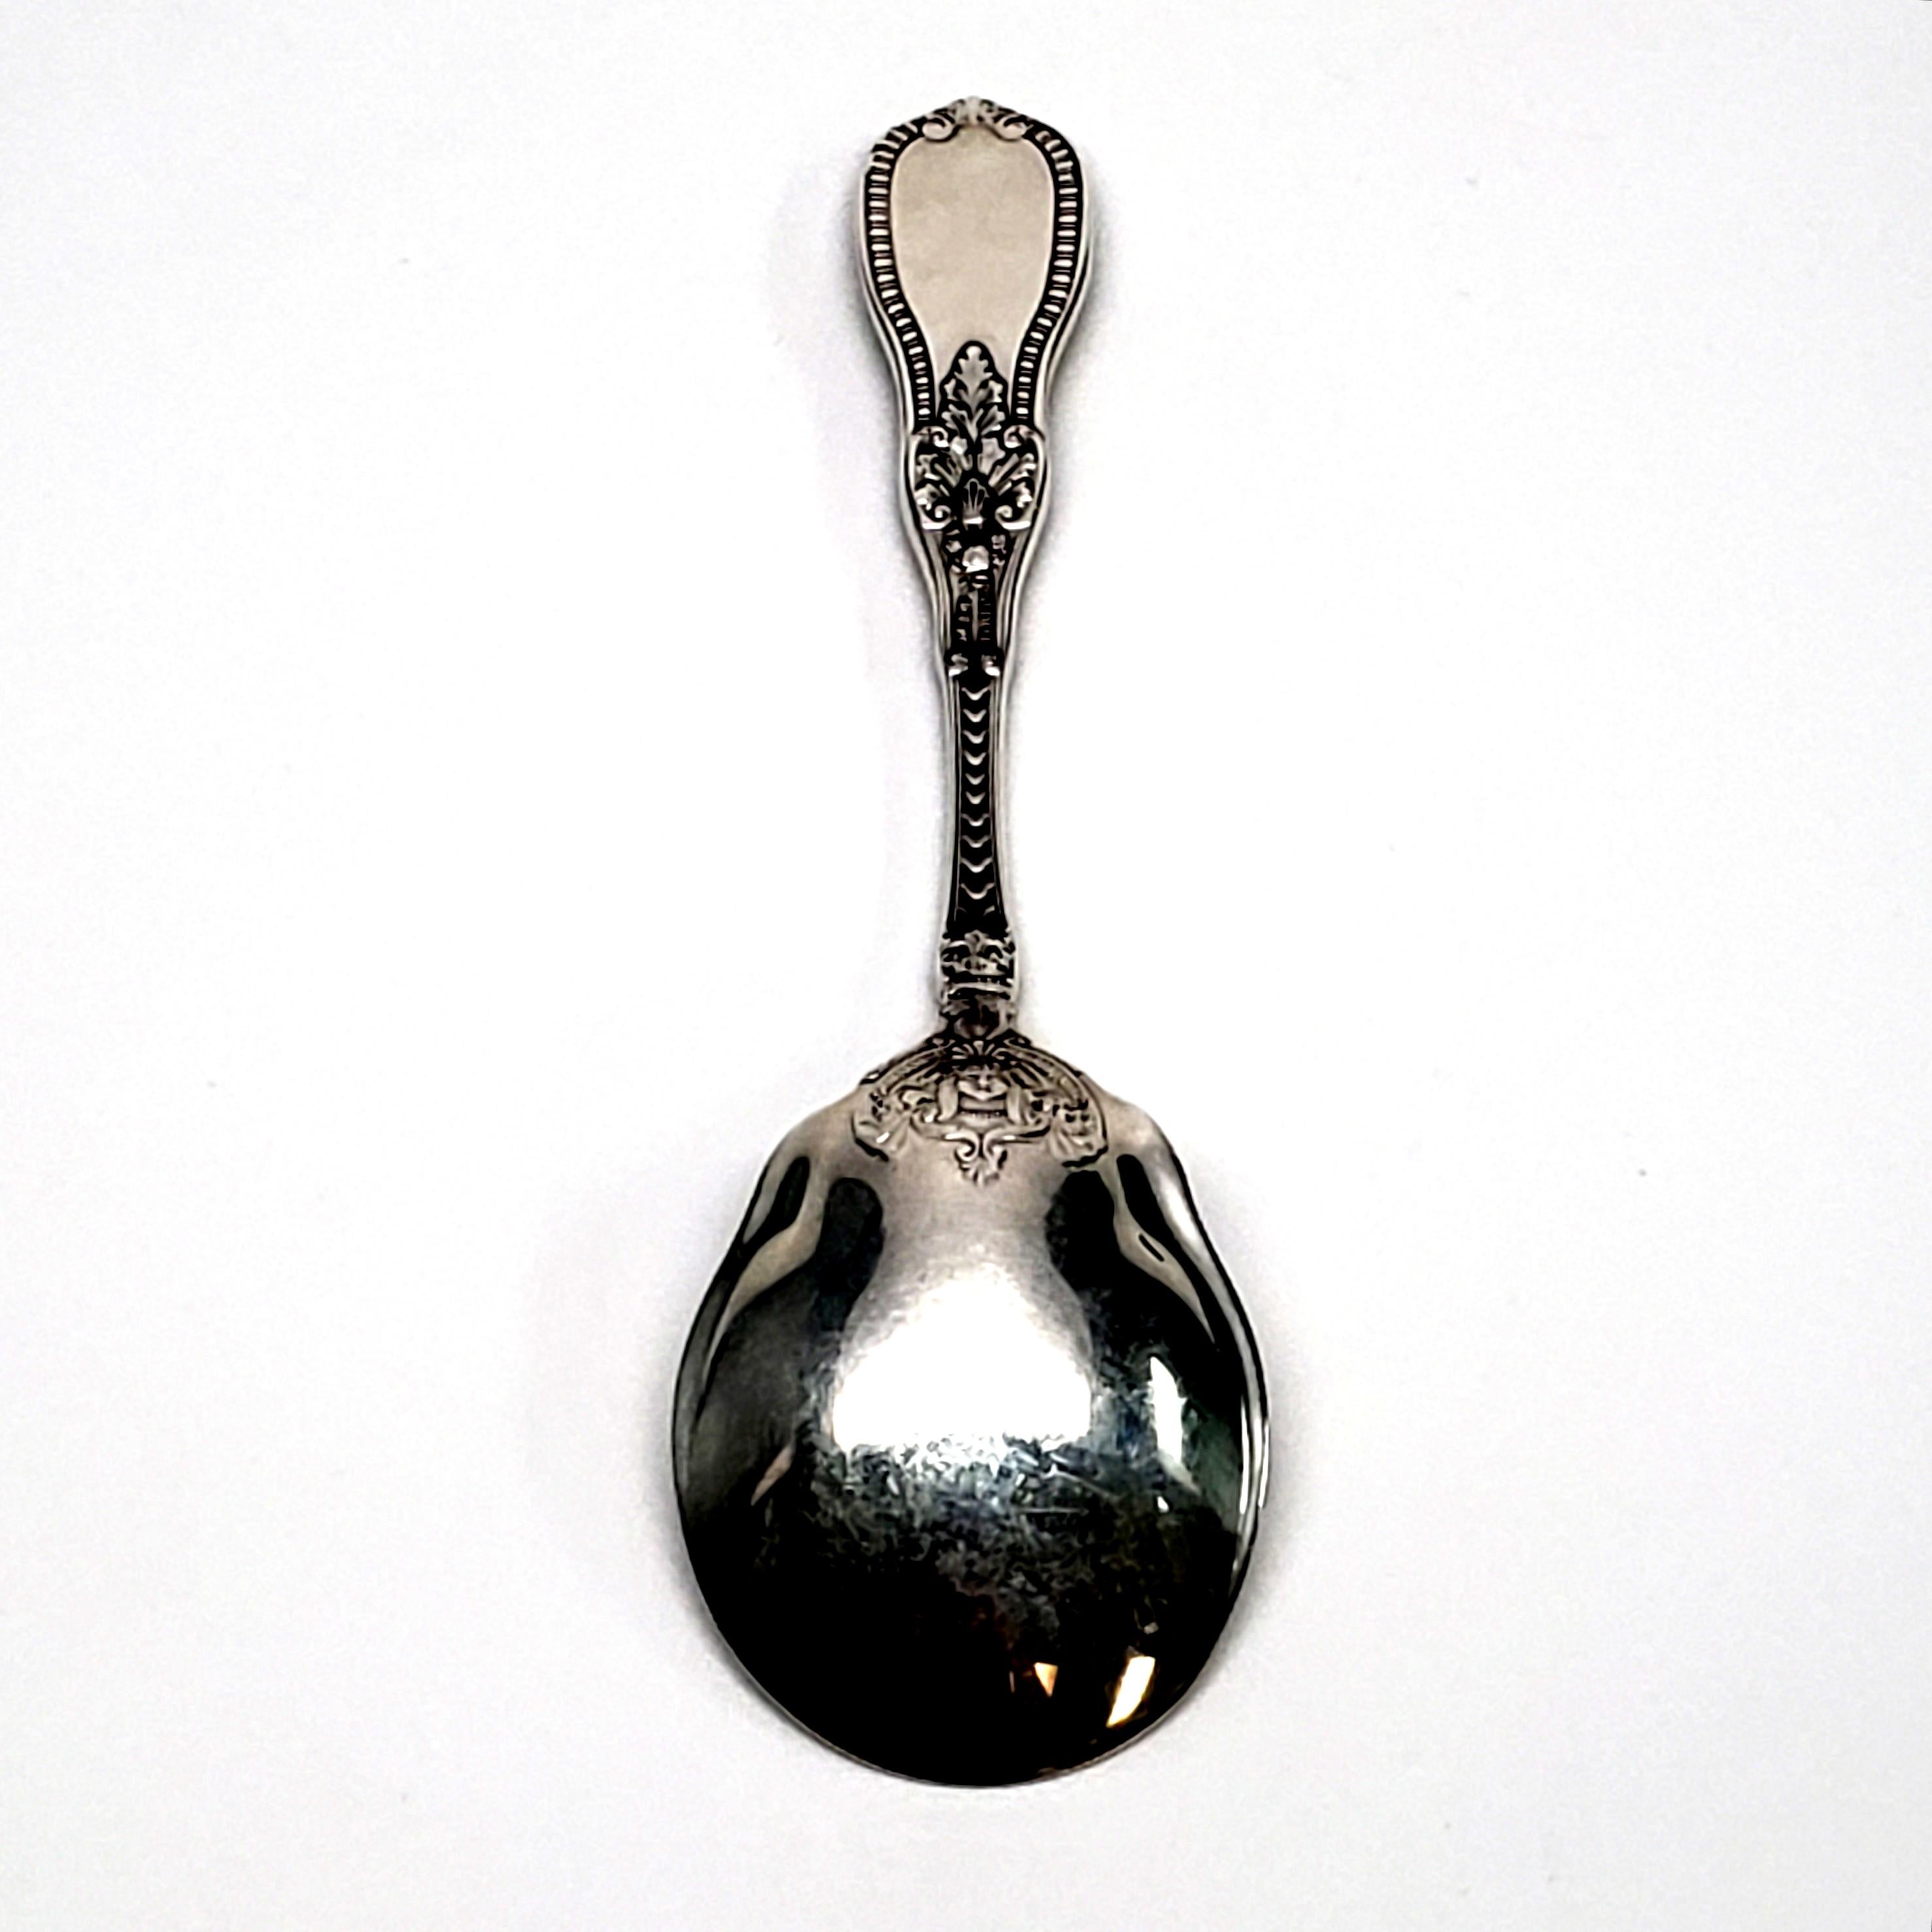 Sterling silver ice cream spoon by Gorham in the Mythologique pattern, circa 1986.

Gorham's Mythologique is a multi motif pattern, this piece is the newer bead border, face pattern, featuring a beaded border on the back handle and a face on the